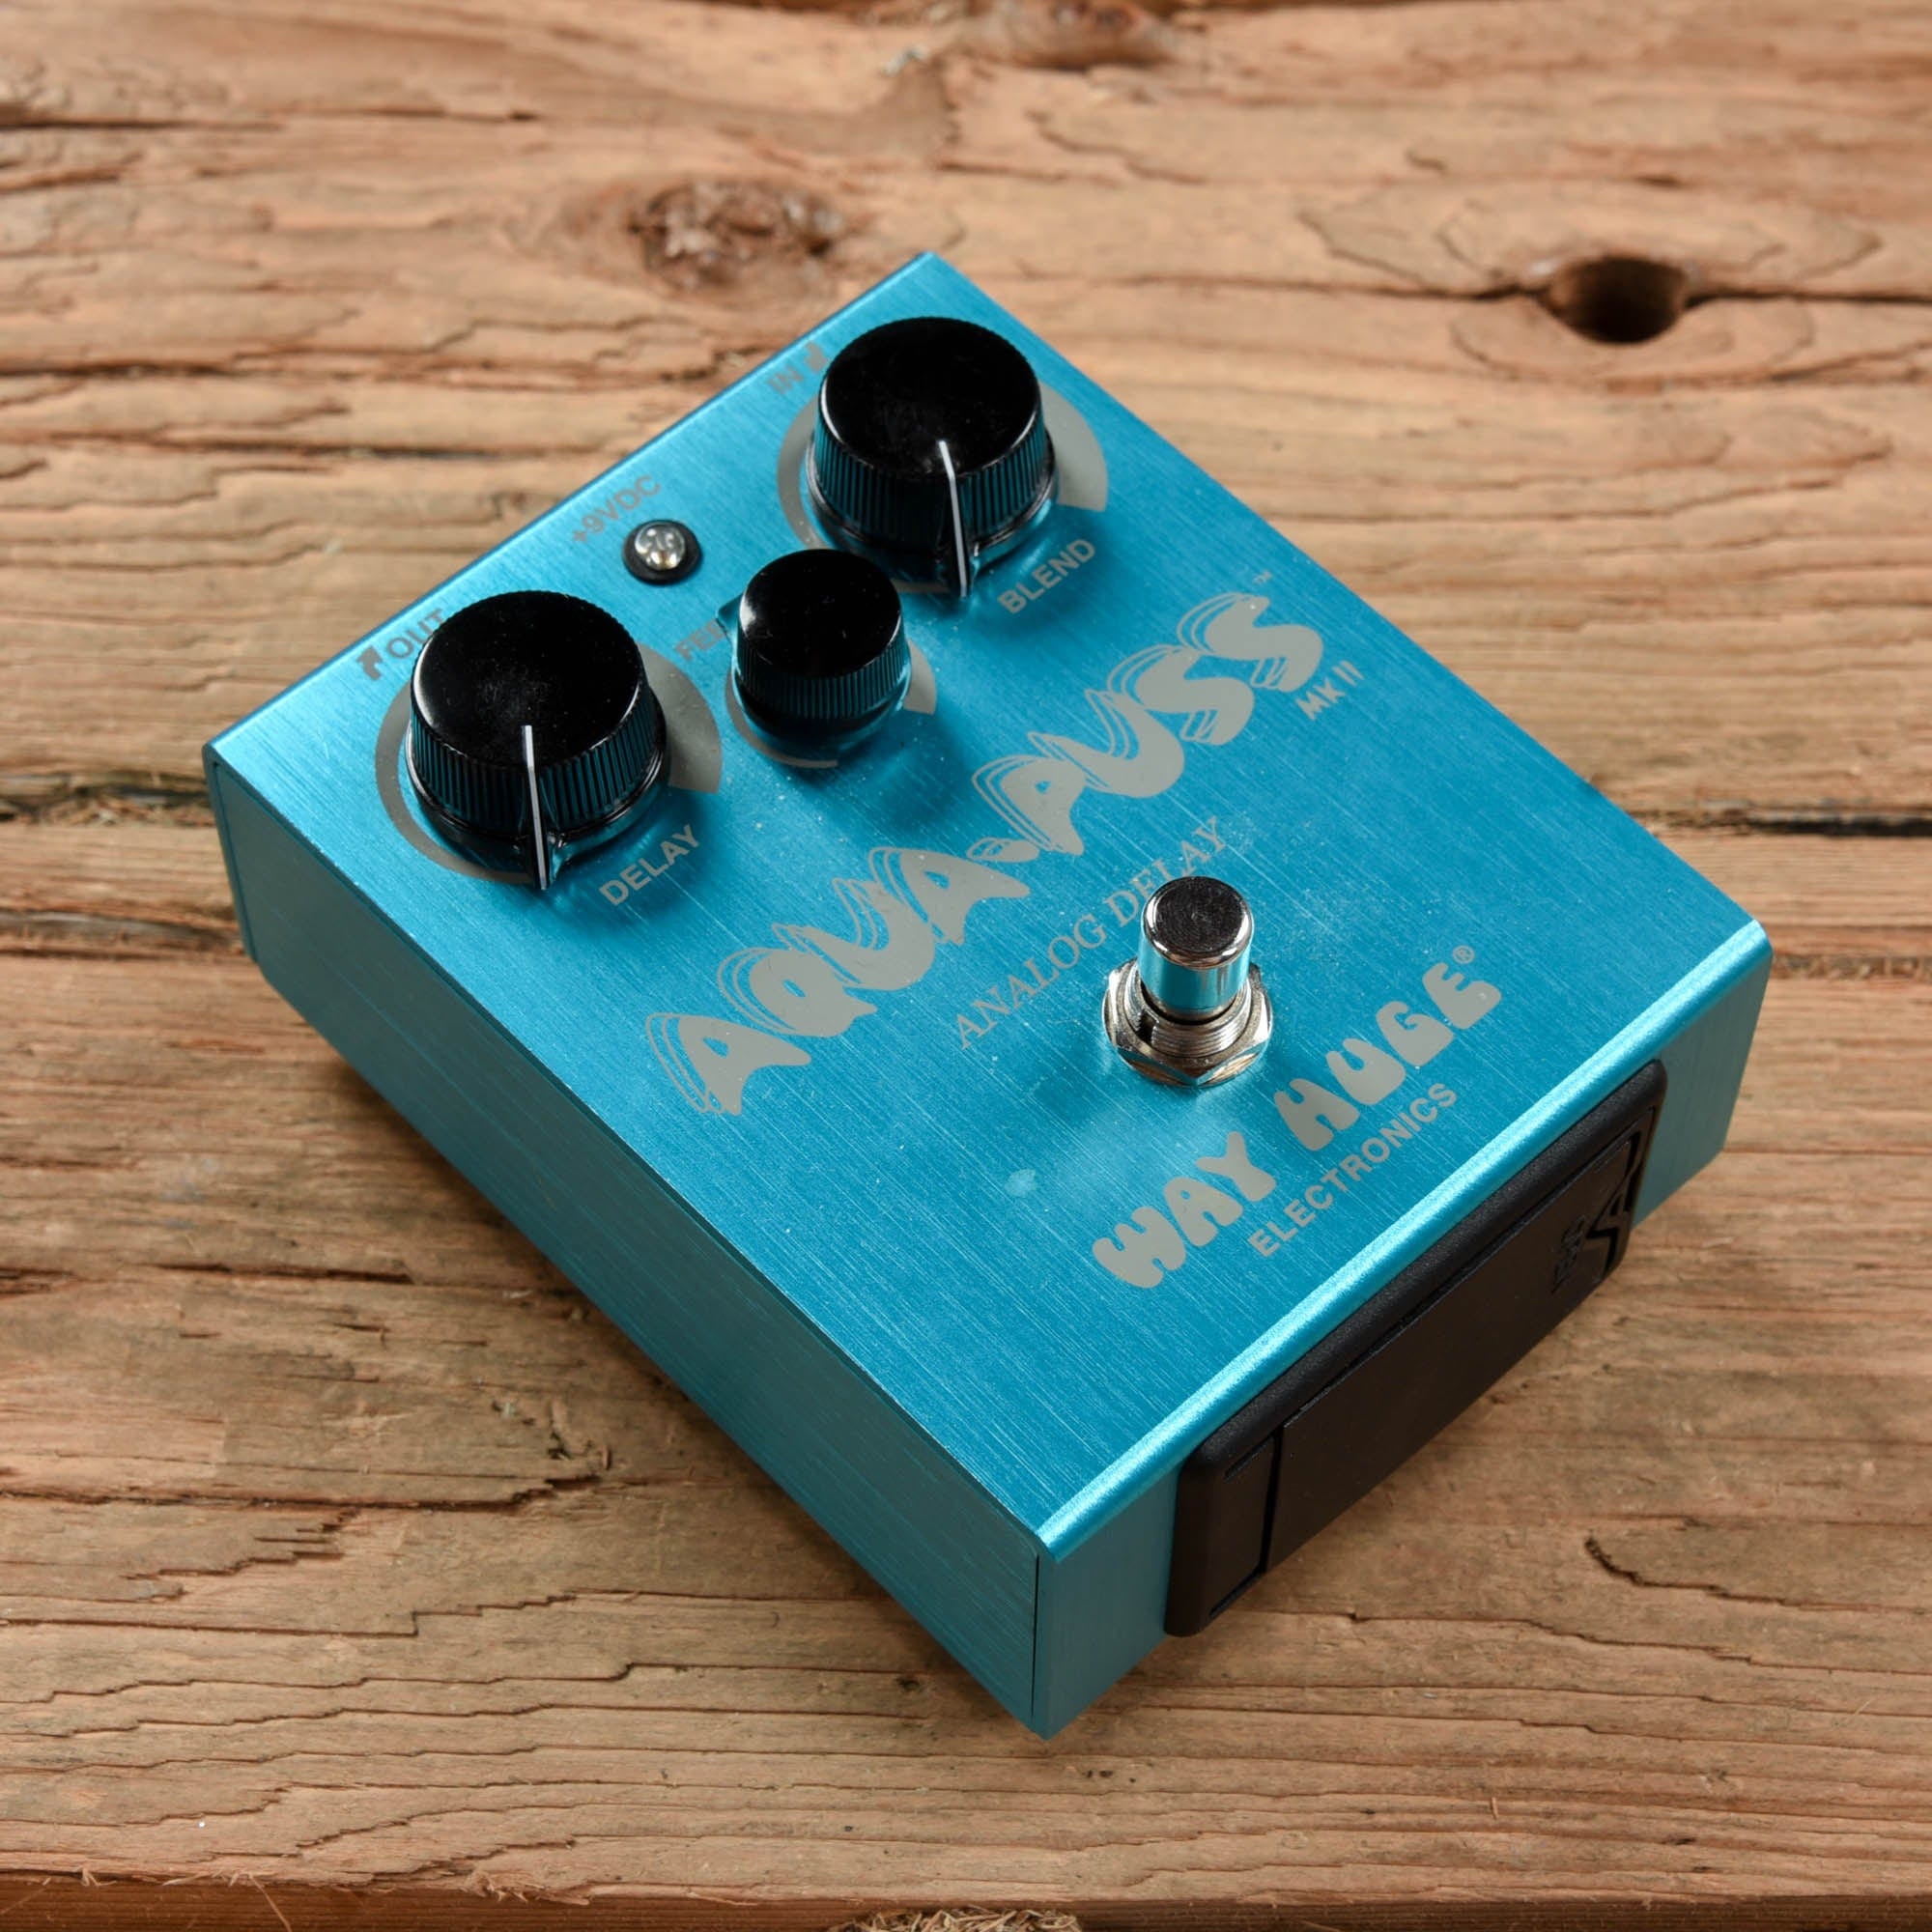 Way Huge Aqua Puss Effects and Pedals / Chorus and Vibrato